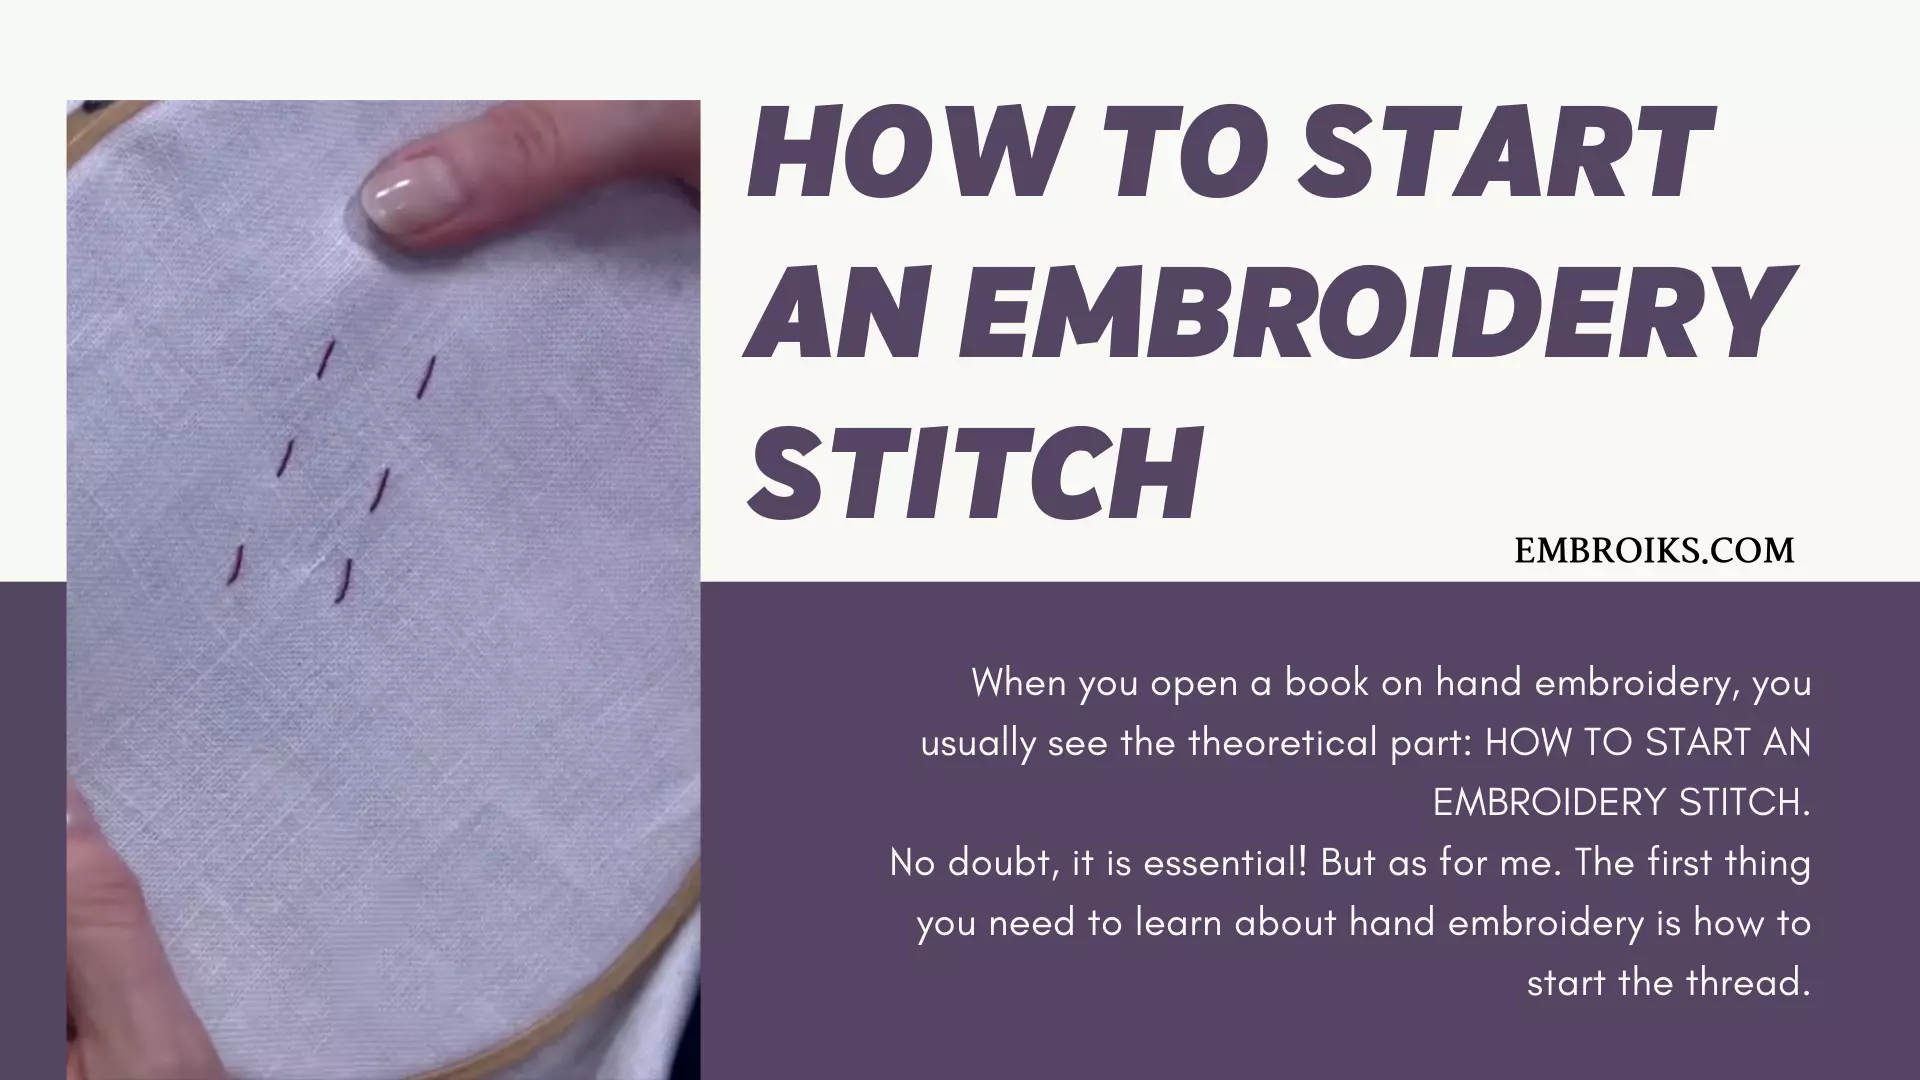 HOW TO START AN EMBROIDERY STITCH